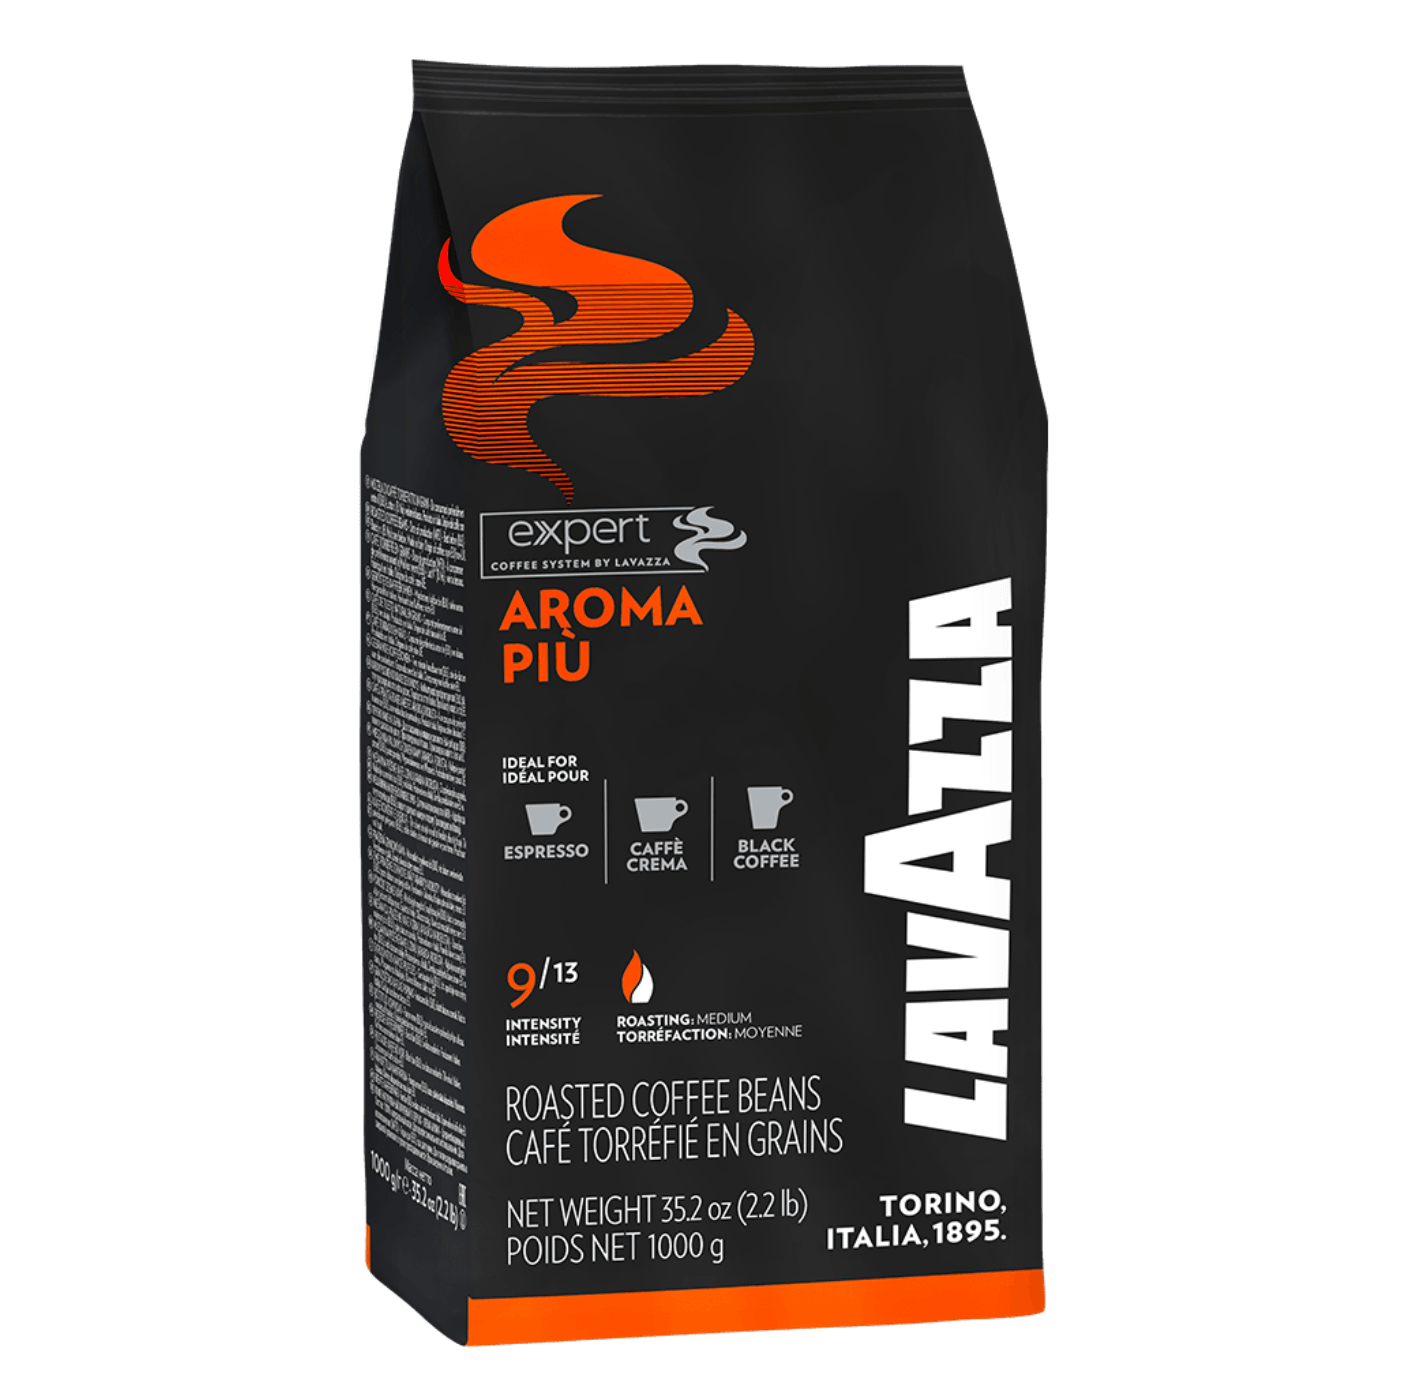 Lavazza Expert Aroma Piu Coffee Beans (1kg Bags or Full Case) - Vending Superstore